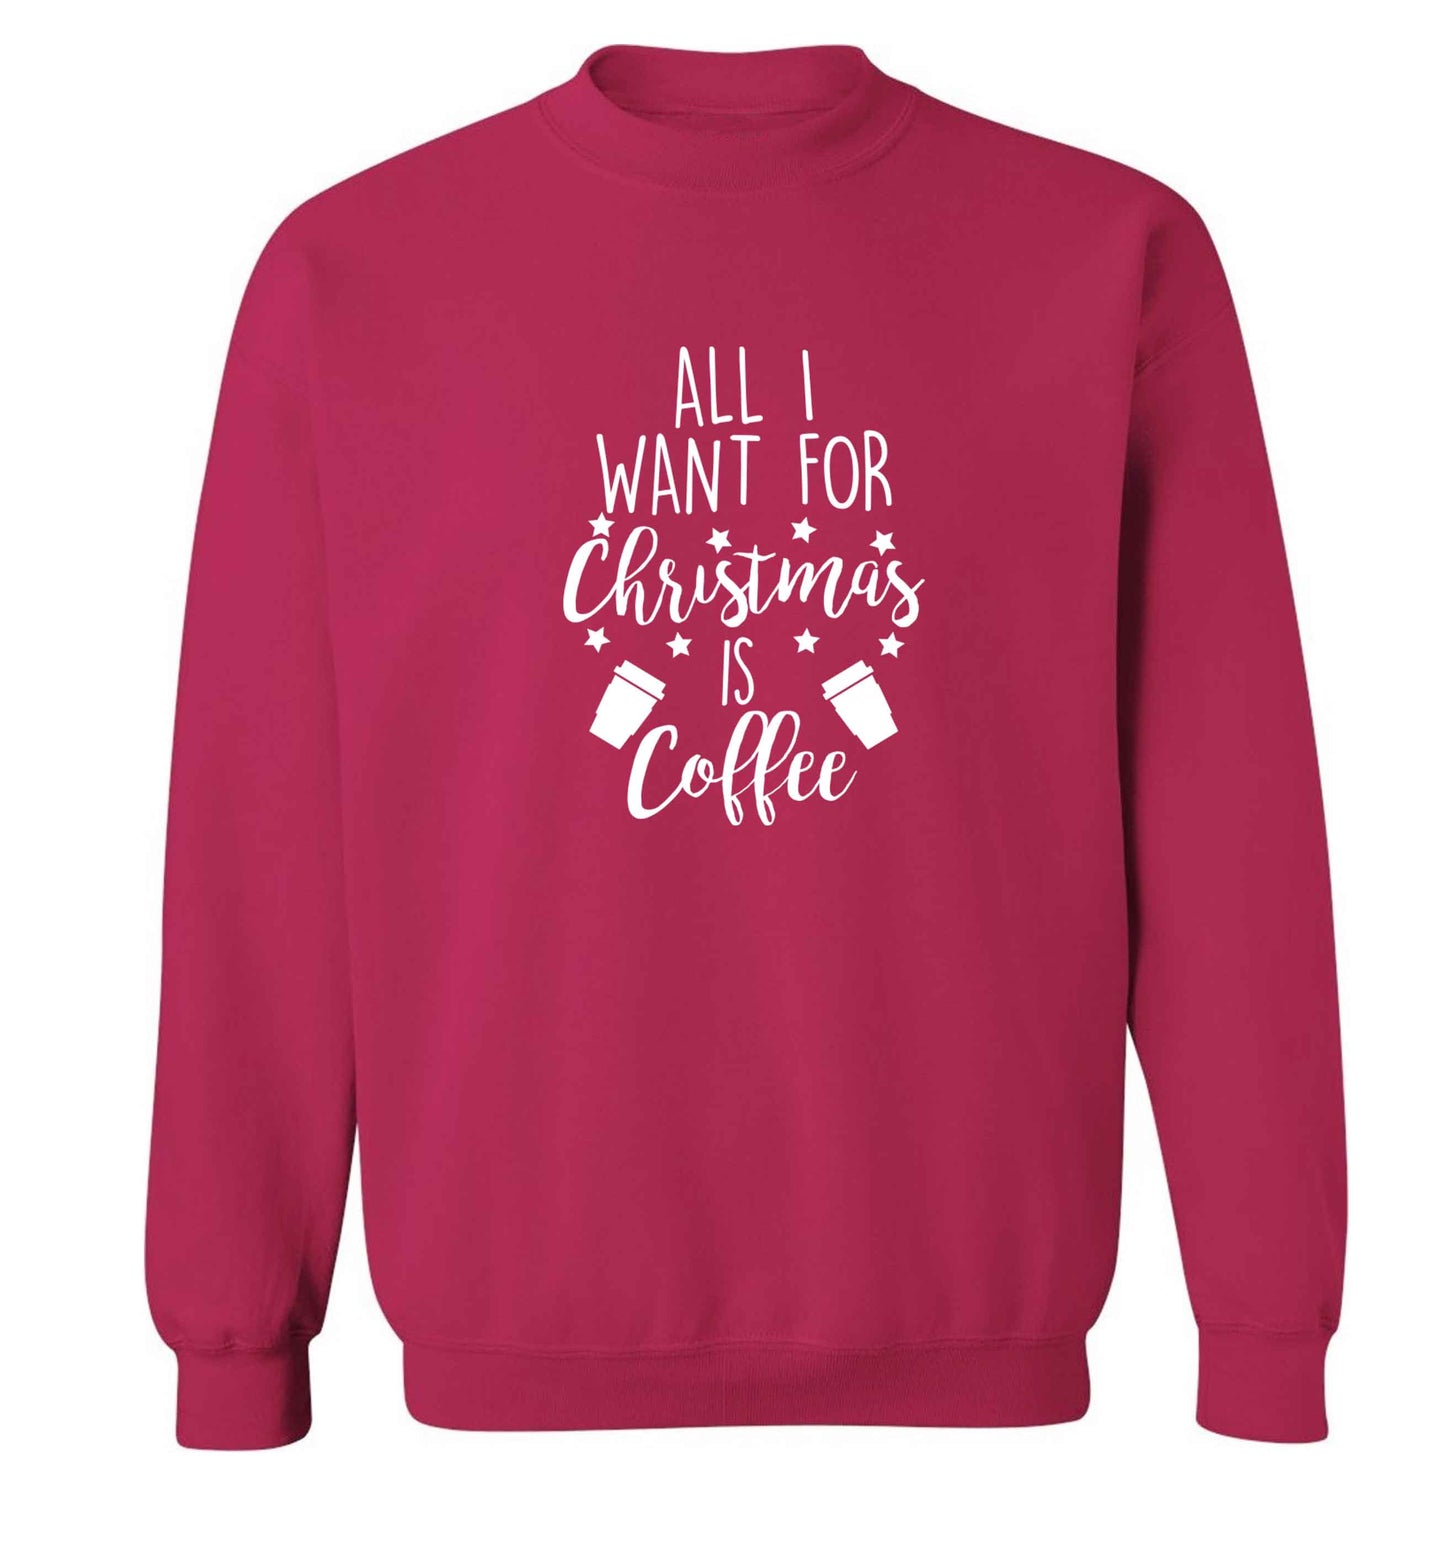 All I want for Christmas is coffee Adult's unisex pink Sweater 2XL